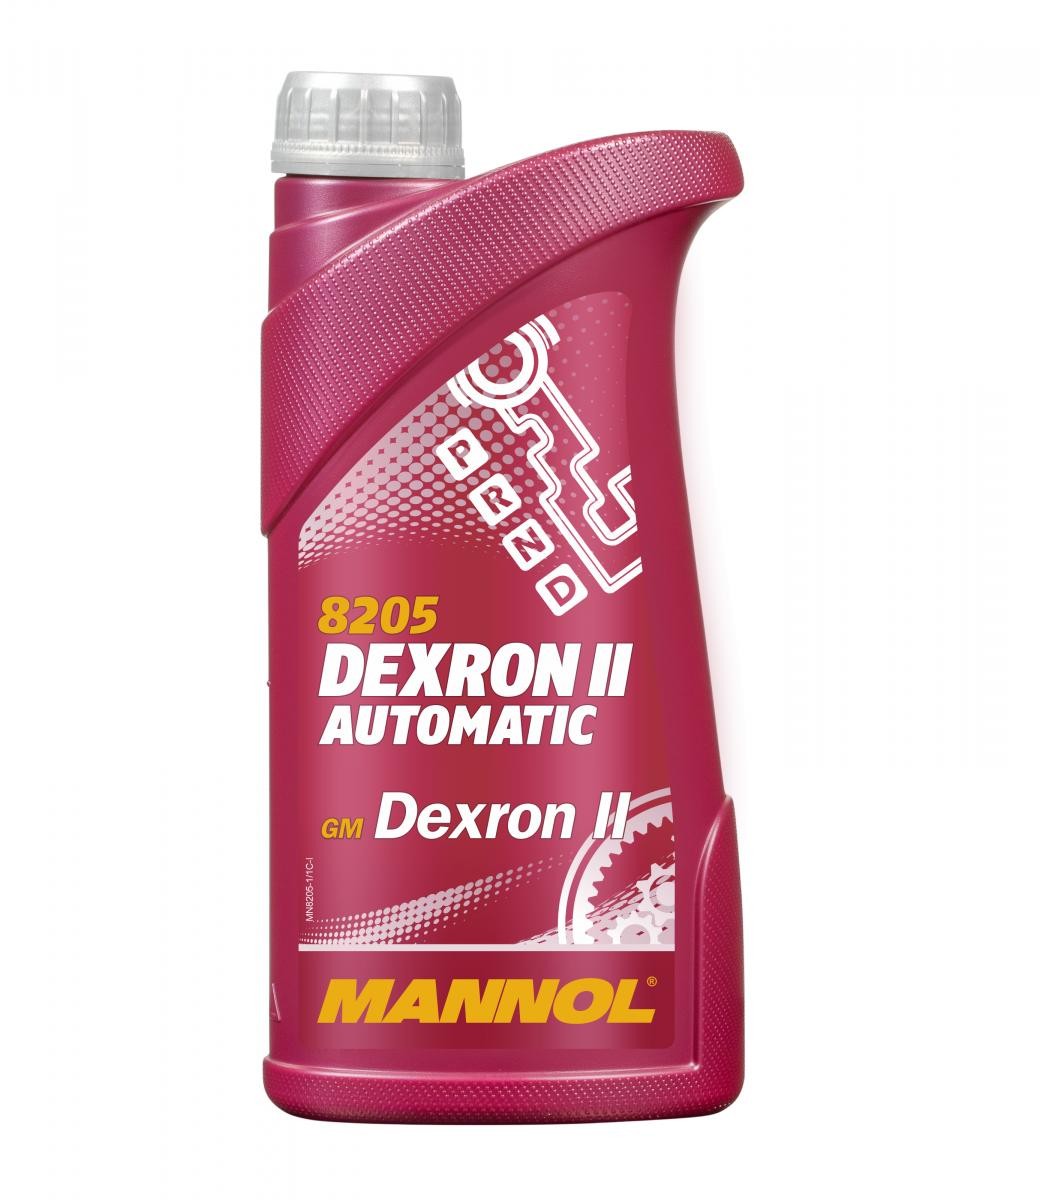 Lancia Automatic transmission fluid MANNOL MN8205-1 at a good price